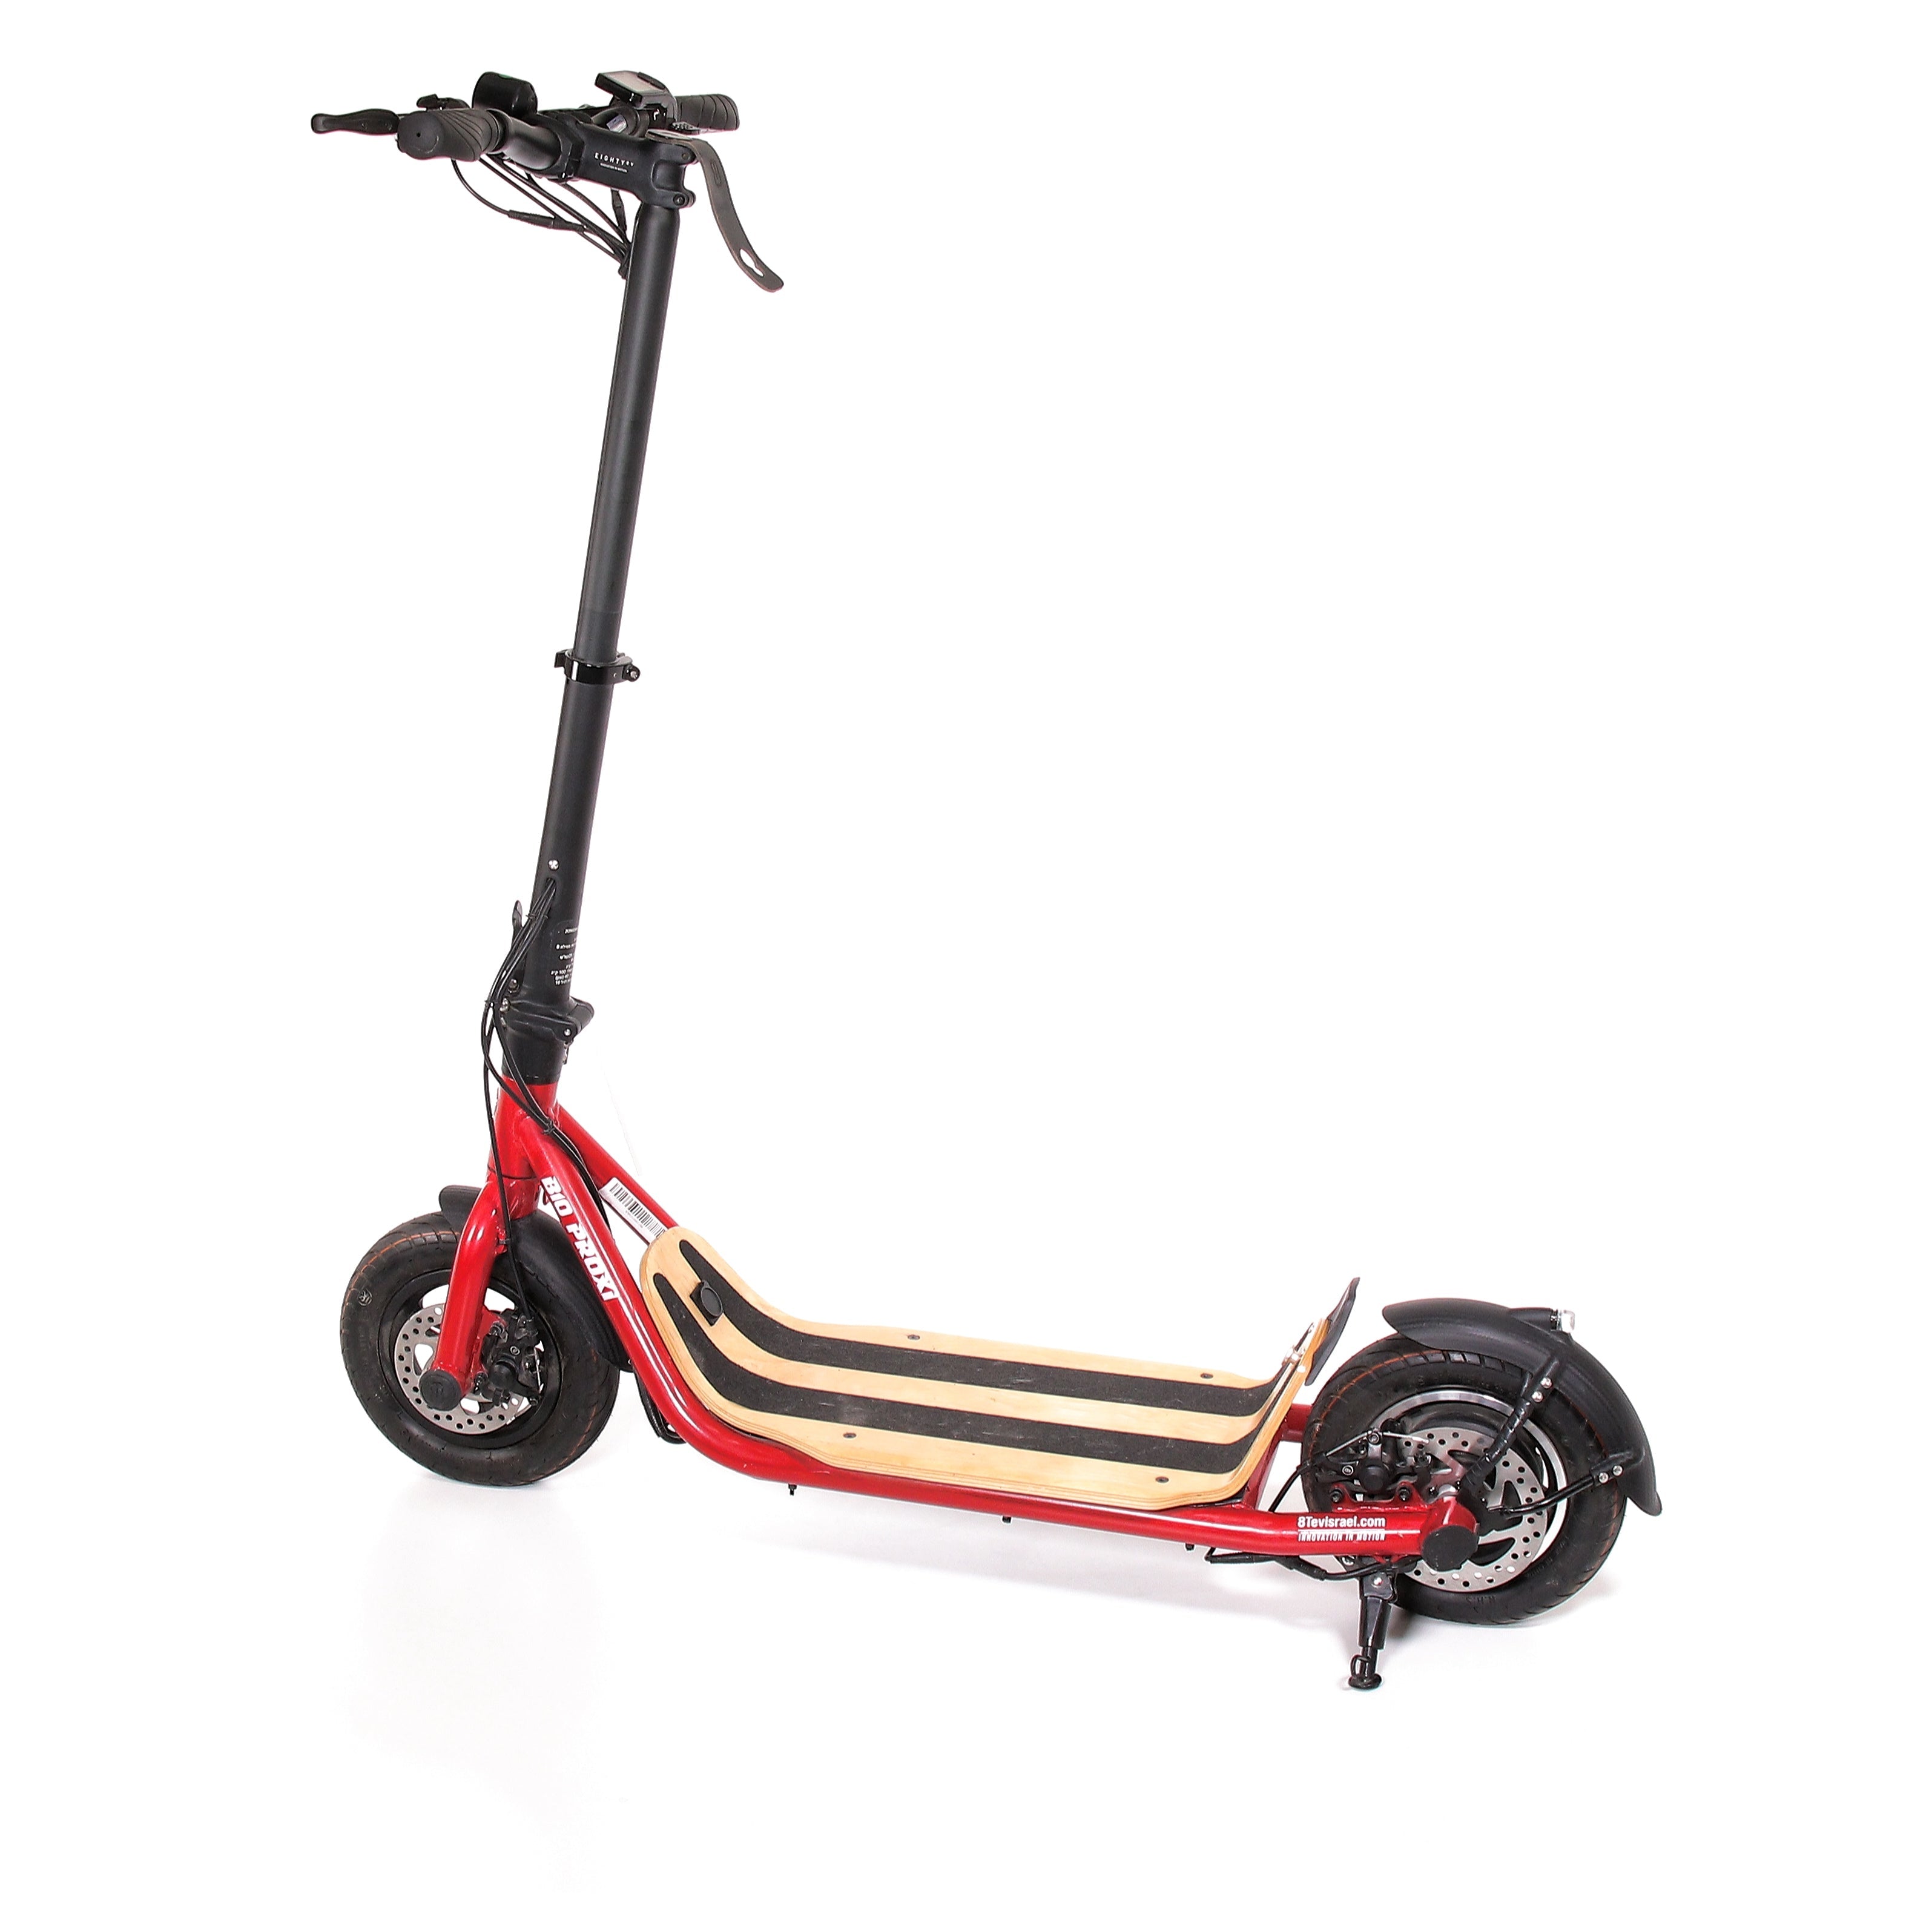 8TEV B10 Proxi Electric Scooter Commuter/City scooter 8TEV 